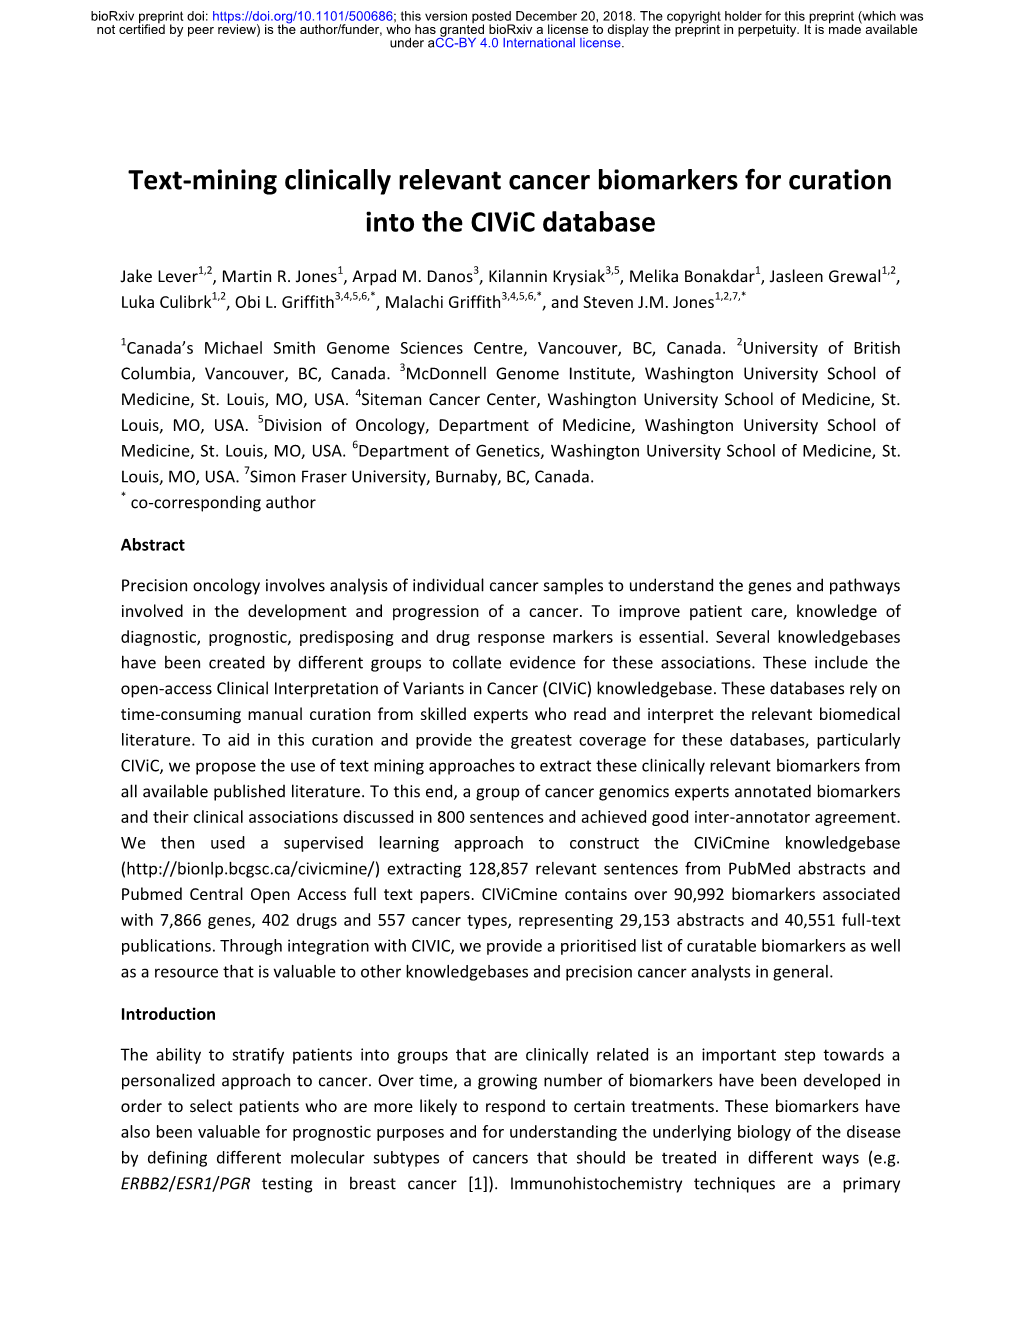 Text-Mining Clinically Relevant Cancer Biomarkers for Curation Into the Civic Database